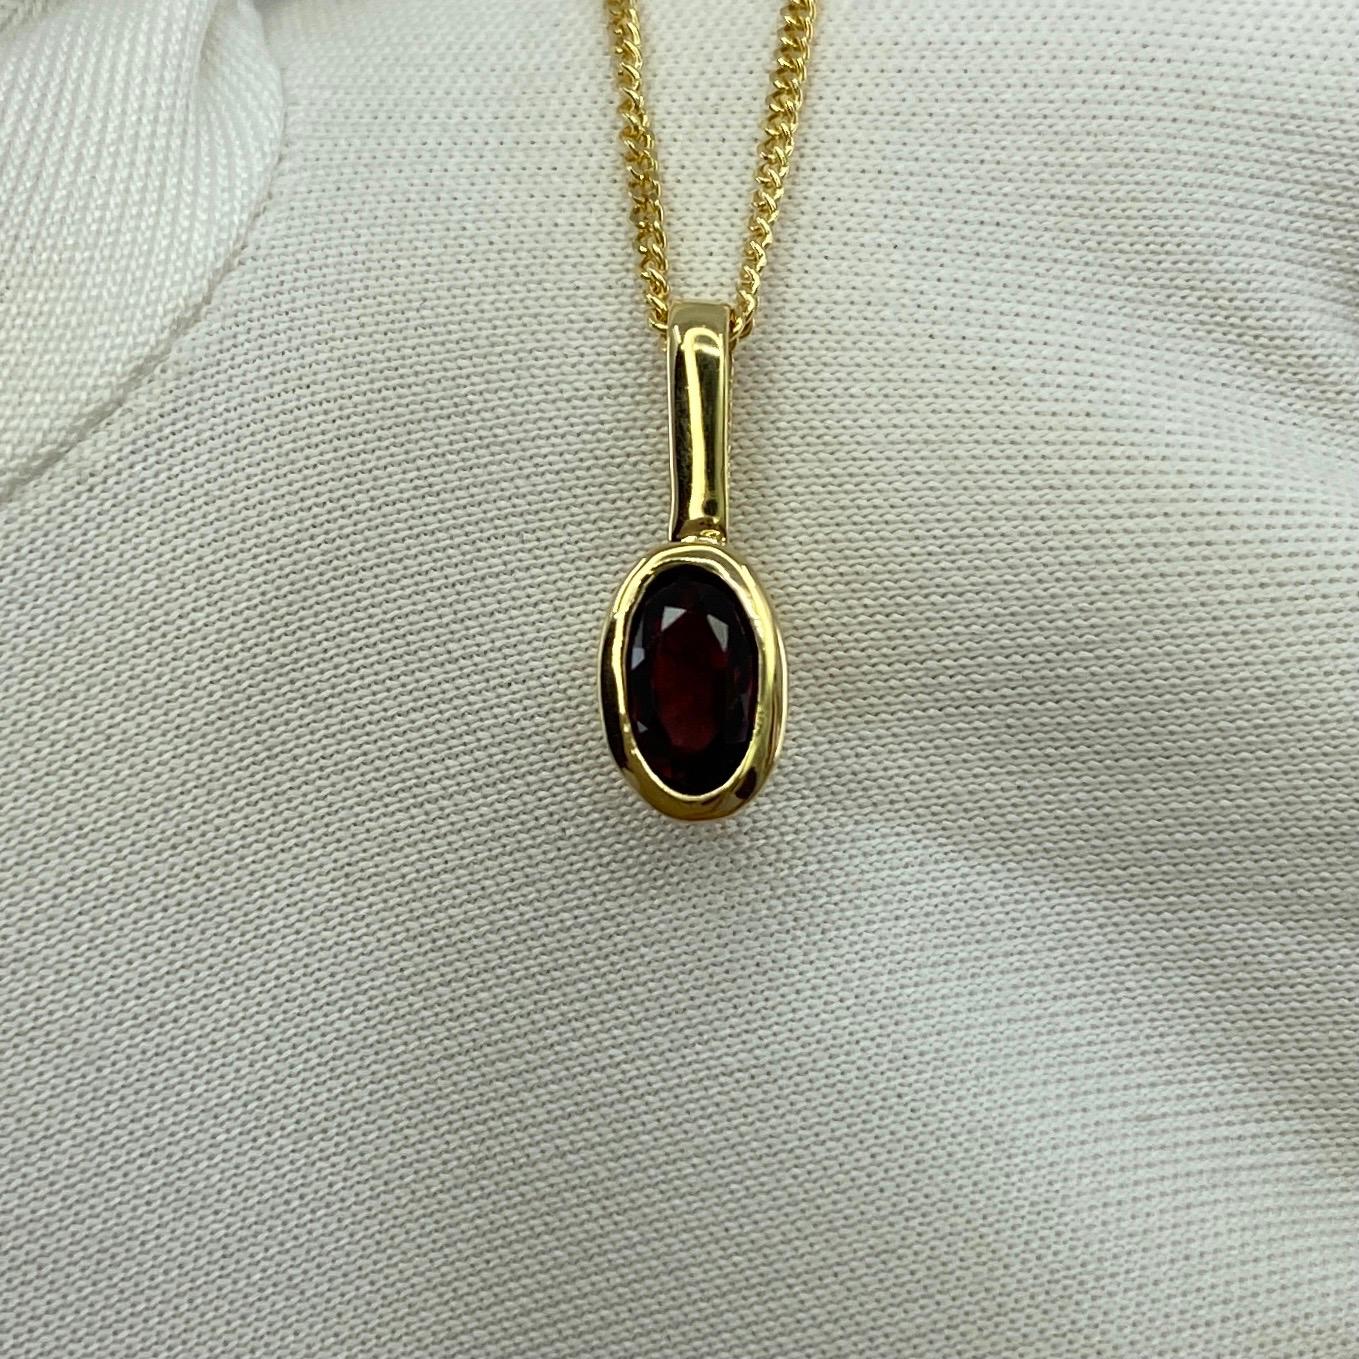 Fine Untreated Deep Red Ruby 18 Karat Yellow Gold Solitaire Pendant Necklace.

Stunning 0.51 carat ruby with a fine deep red colour and excellent oval cut. Also has good clarity with only some small natural inclusions visible when looking closely.